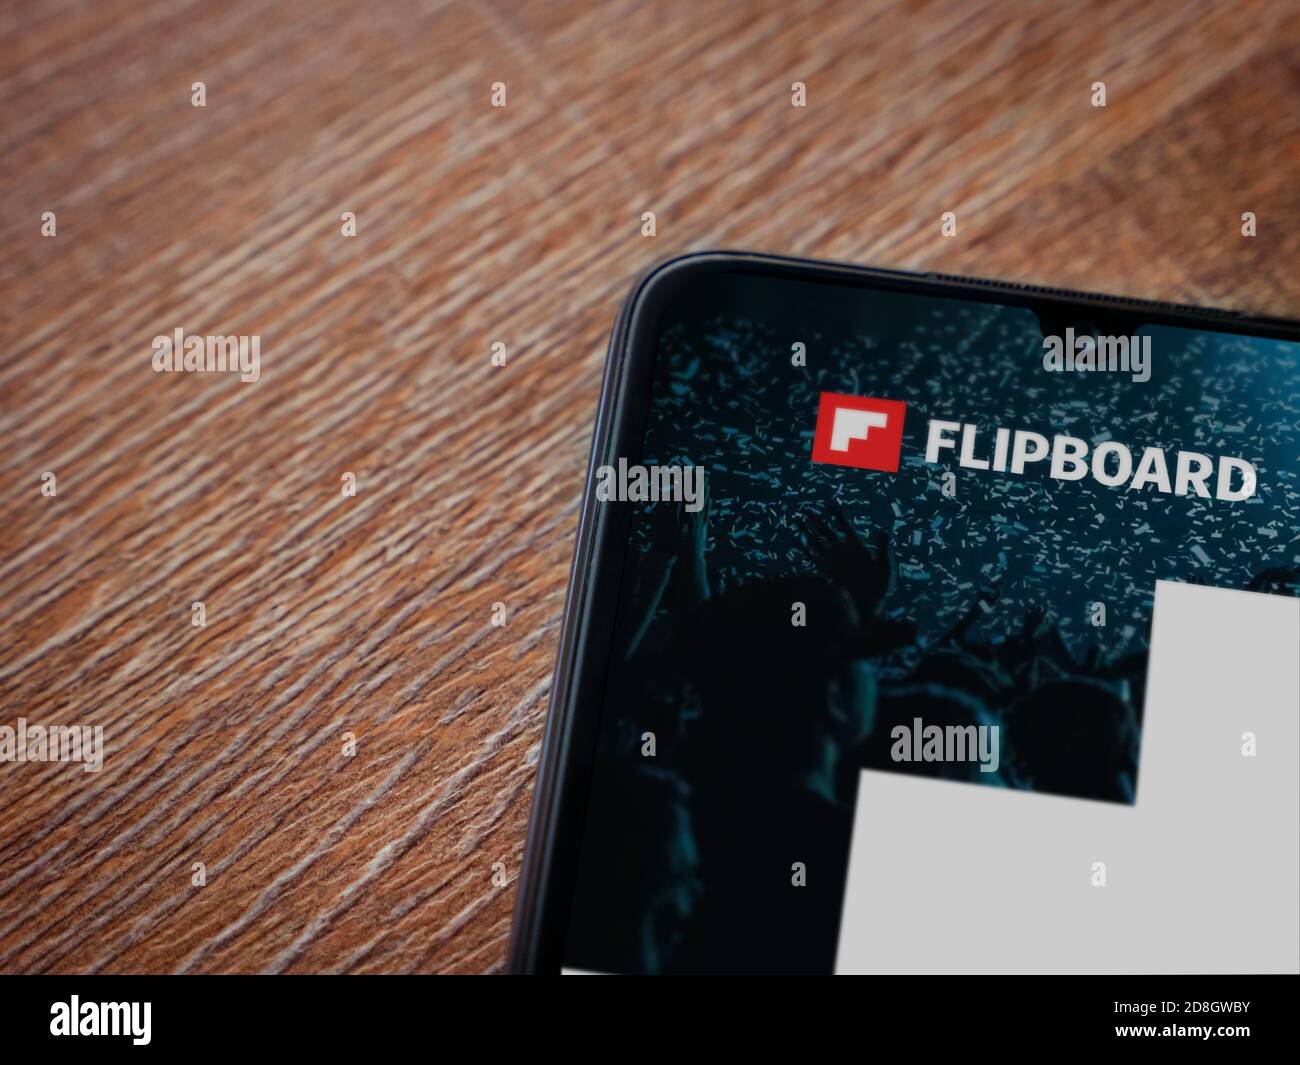 Lod, Israel - July 8, 2020: Flipboard app launch screen with logo on the display of a black mobile smartphone on wooden background. Top view flat lay Stock Photo